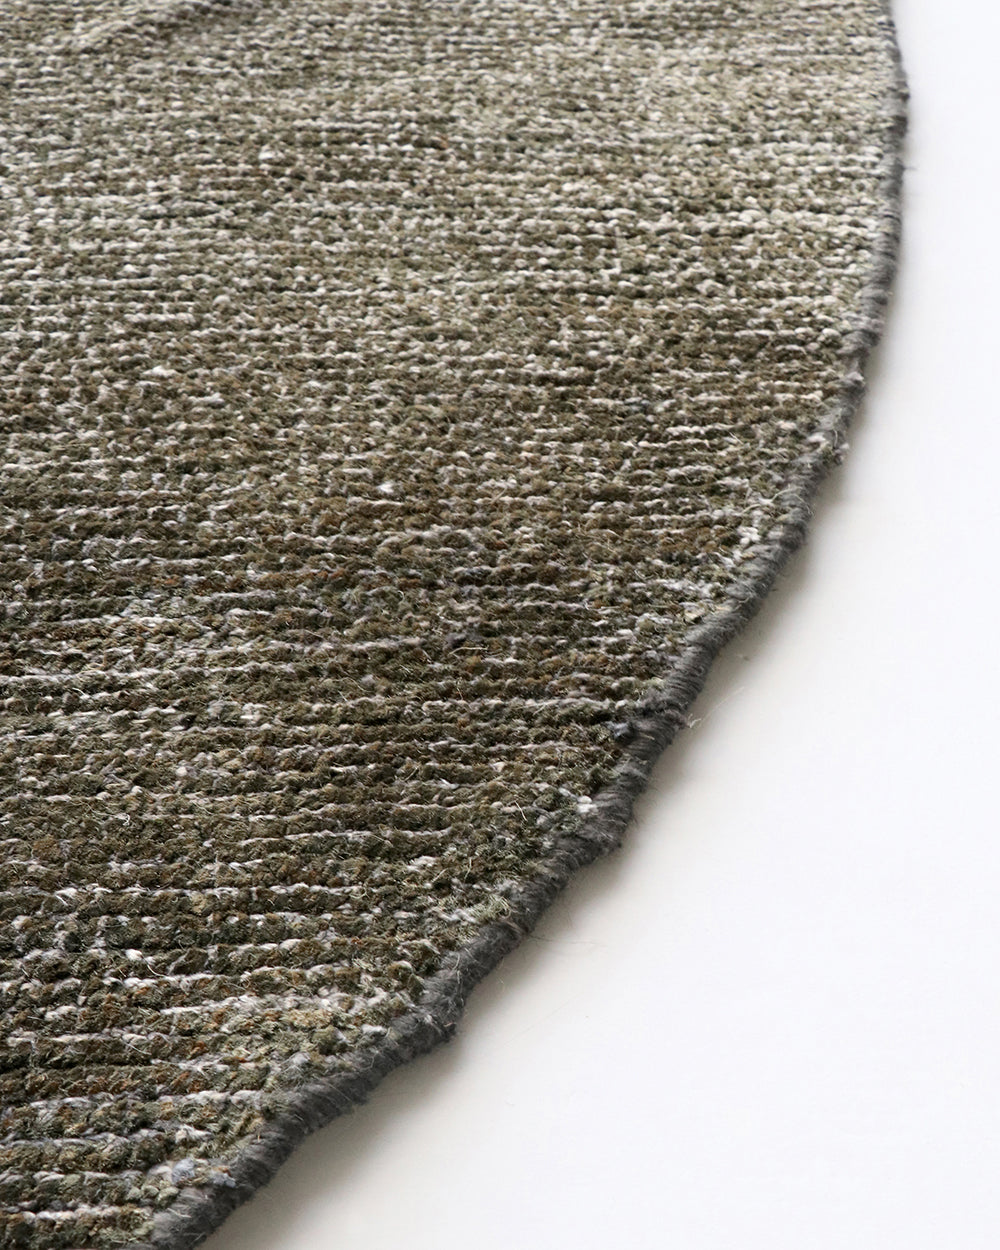 Anchroage Gravel Round Rug from Baya Furtex Stockist Make Your House A Home, Furniture Store Bendigo. Free Australia Wide Delivery. Mulberi Rugs.